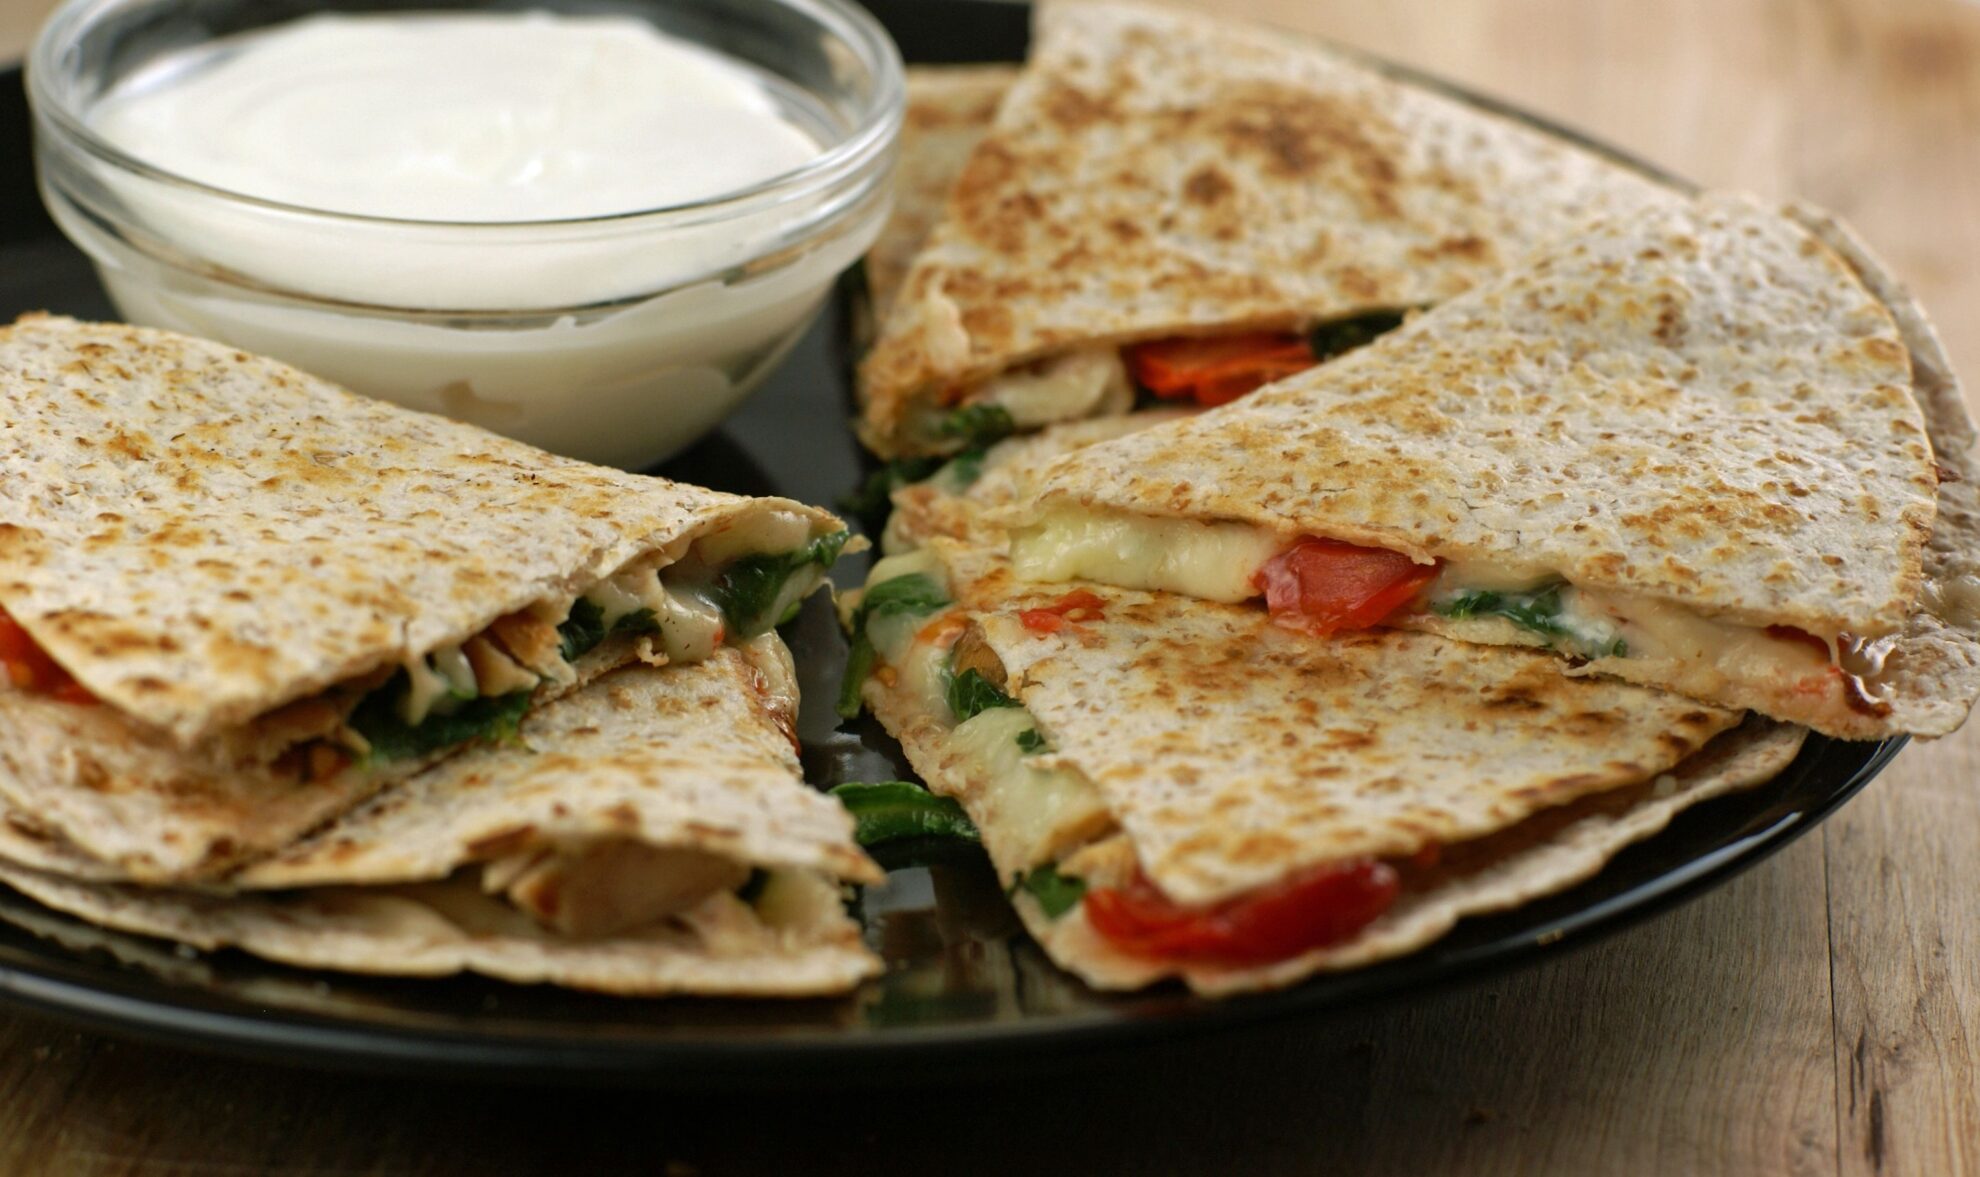 Chicken and Spinach Queso Quesadillas from 5DollarDinners.com